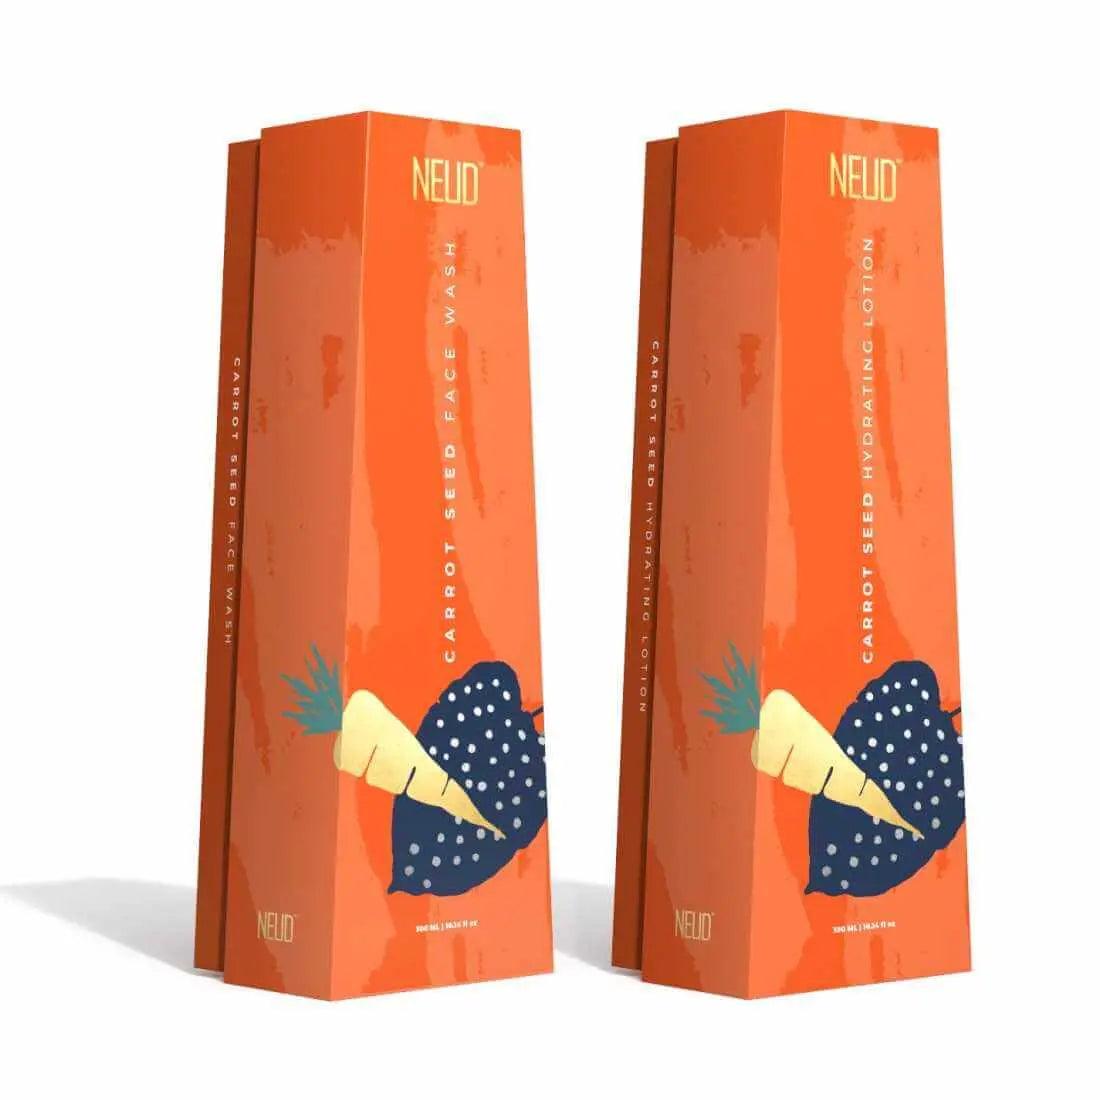 NEUD Combo: Carrot Seed Face Wash & Hydrating Lotion for Men & Women (300 ml Each) 8903540012255